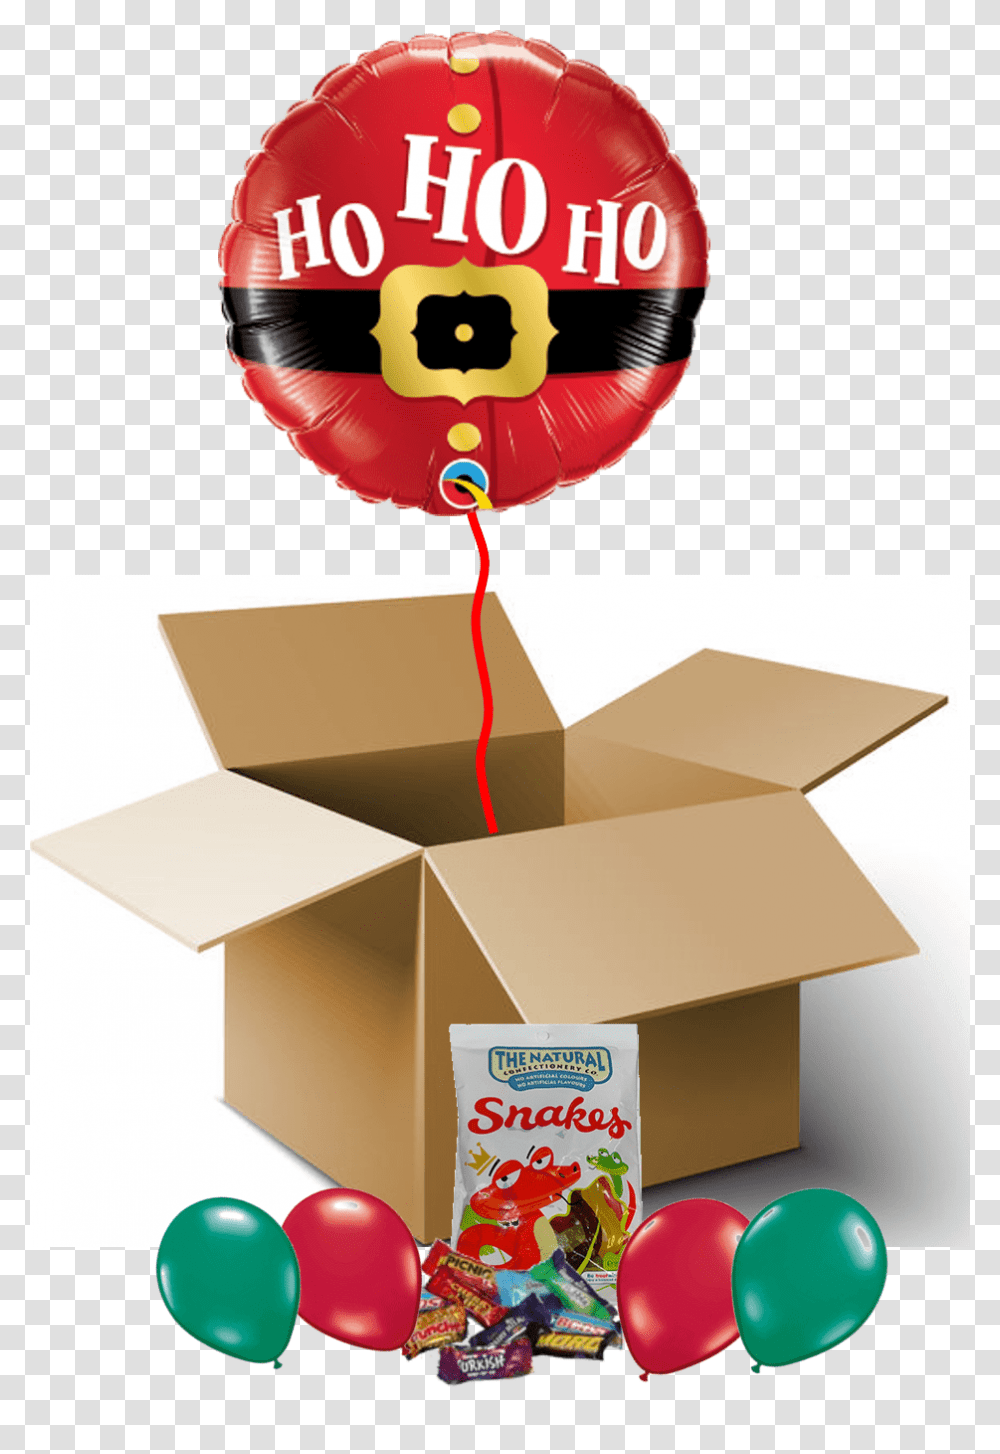 Ho Ho Ho Balloon In A Box, Cardboard, Carton, Package Delivery Transparent Png